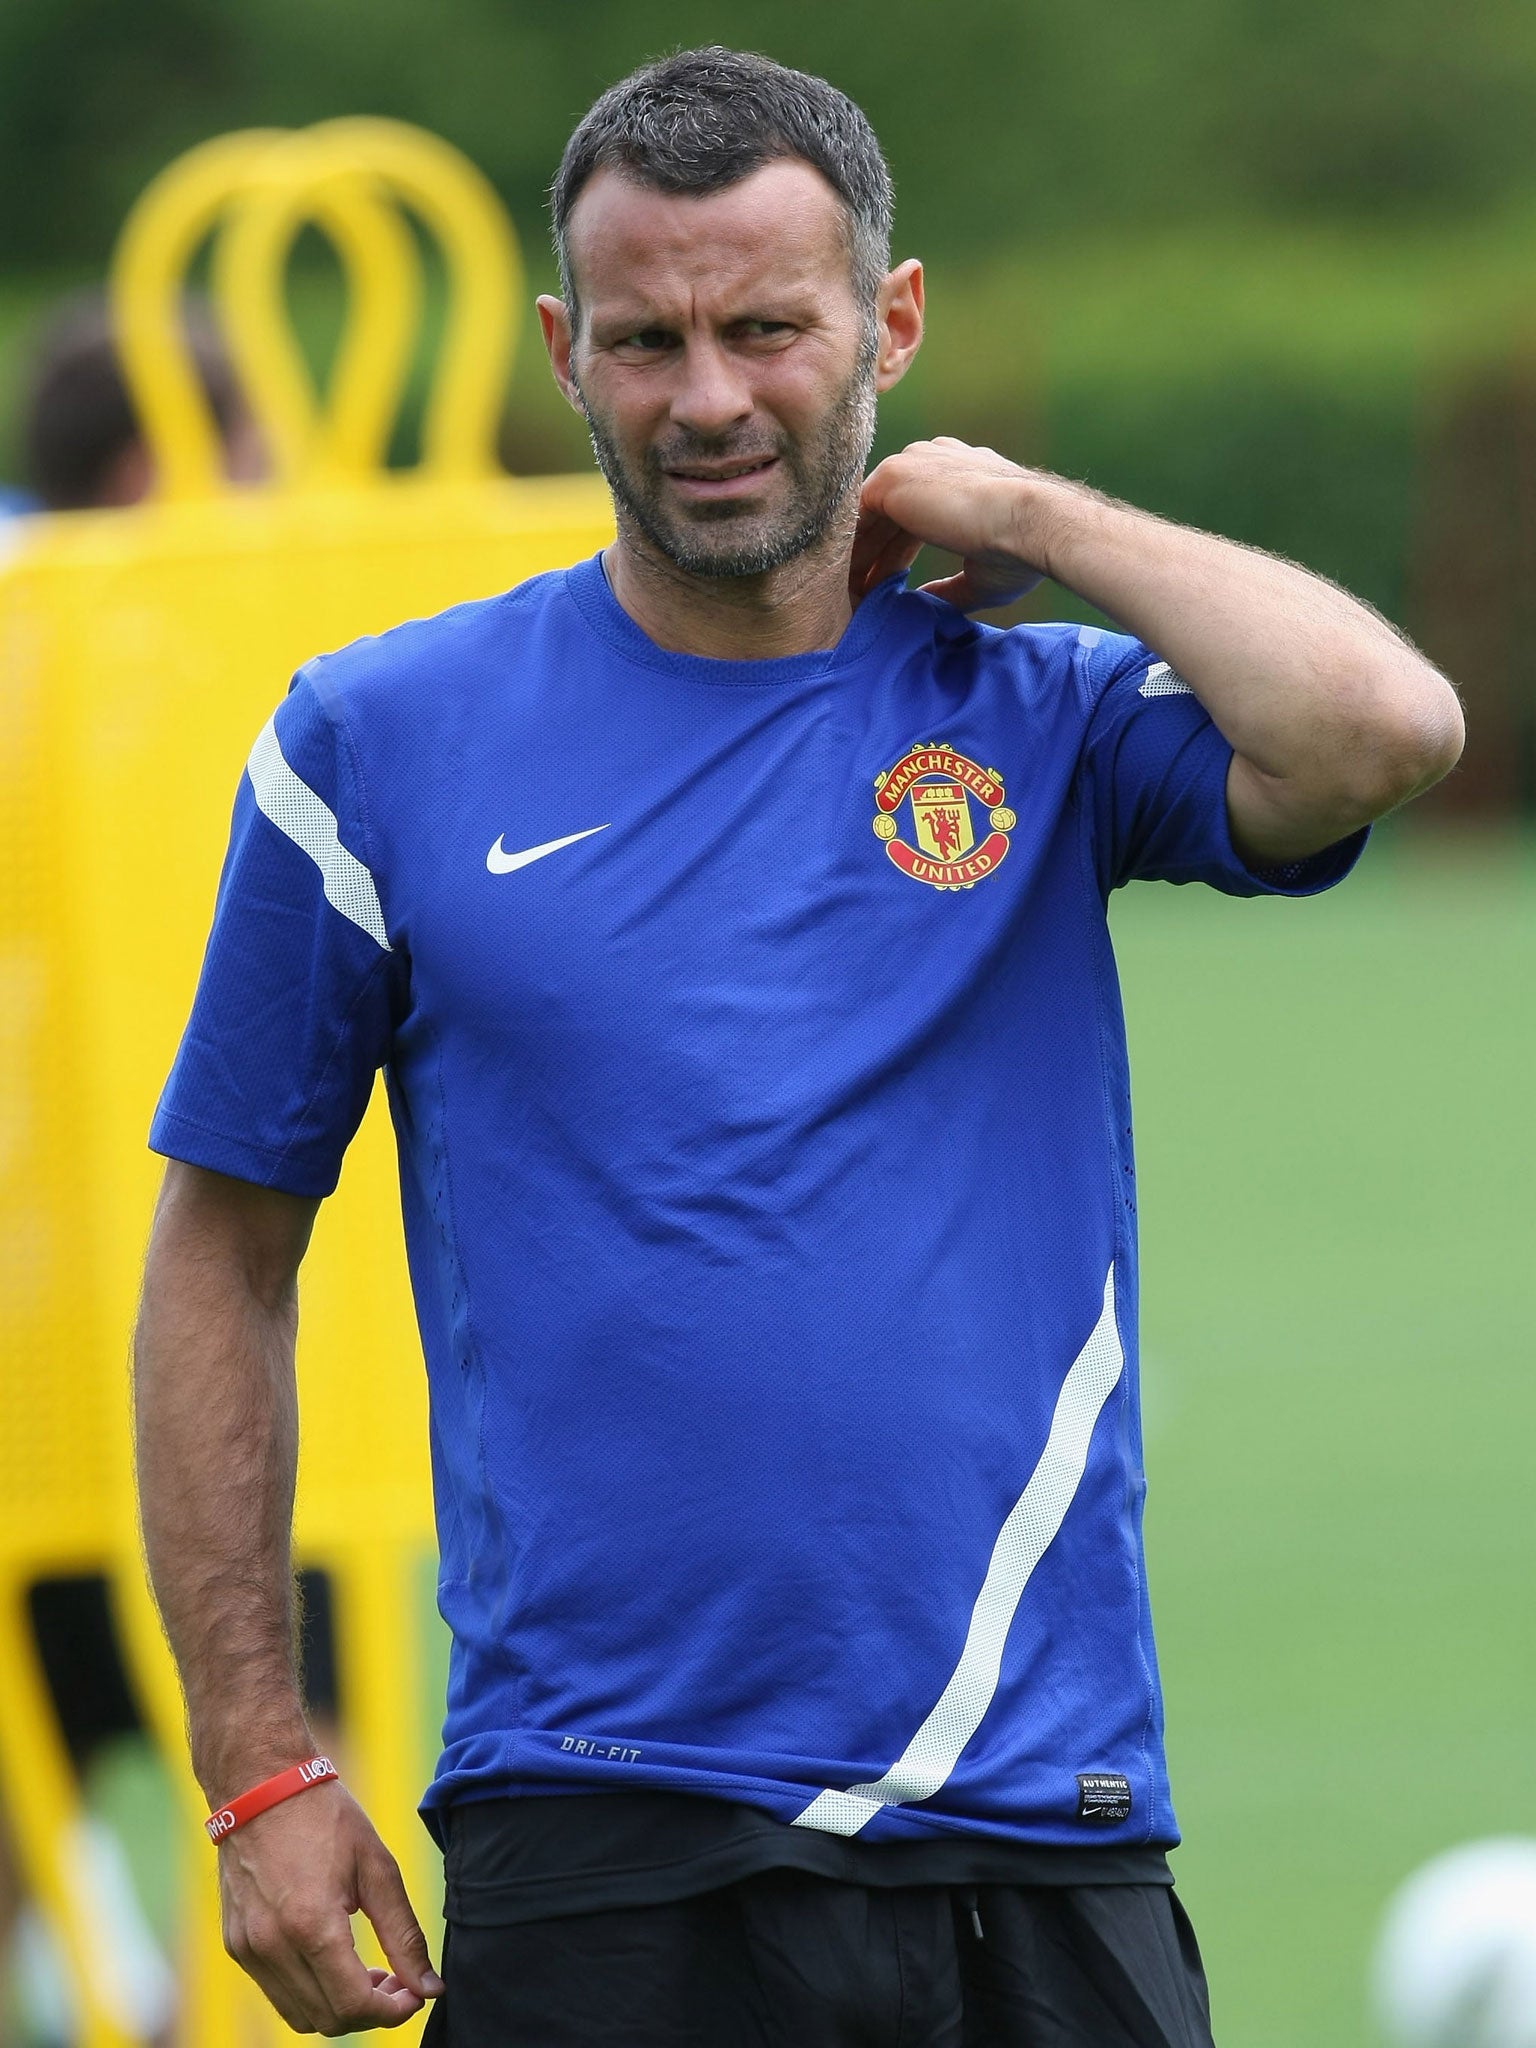 Ryan Giggs is the first player to complete his Uefa Pro Licence while still playing